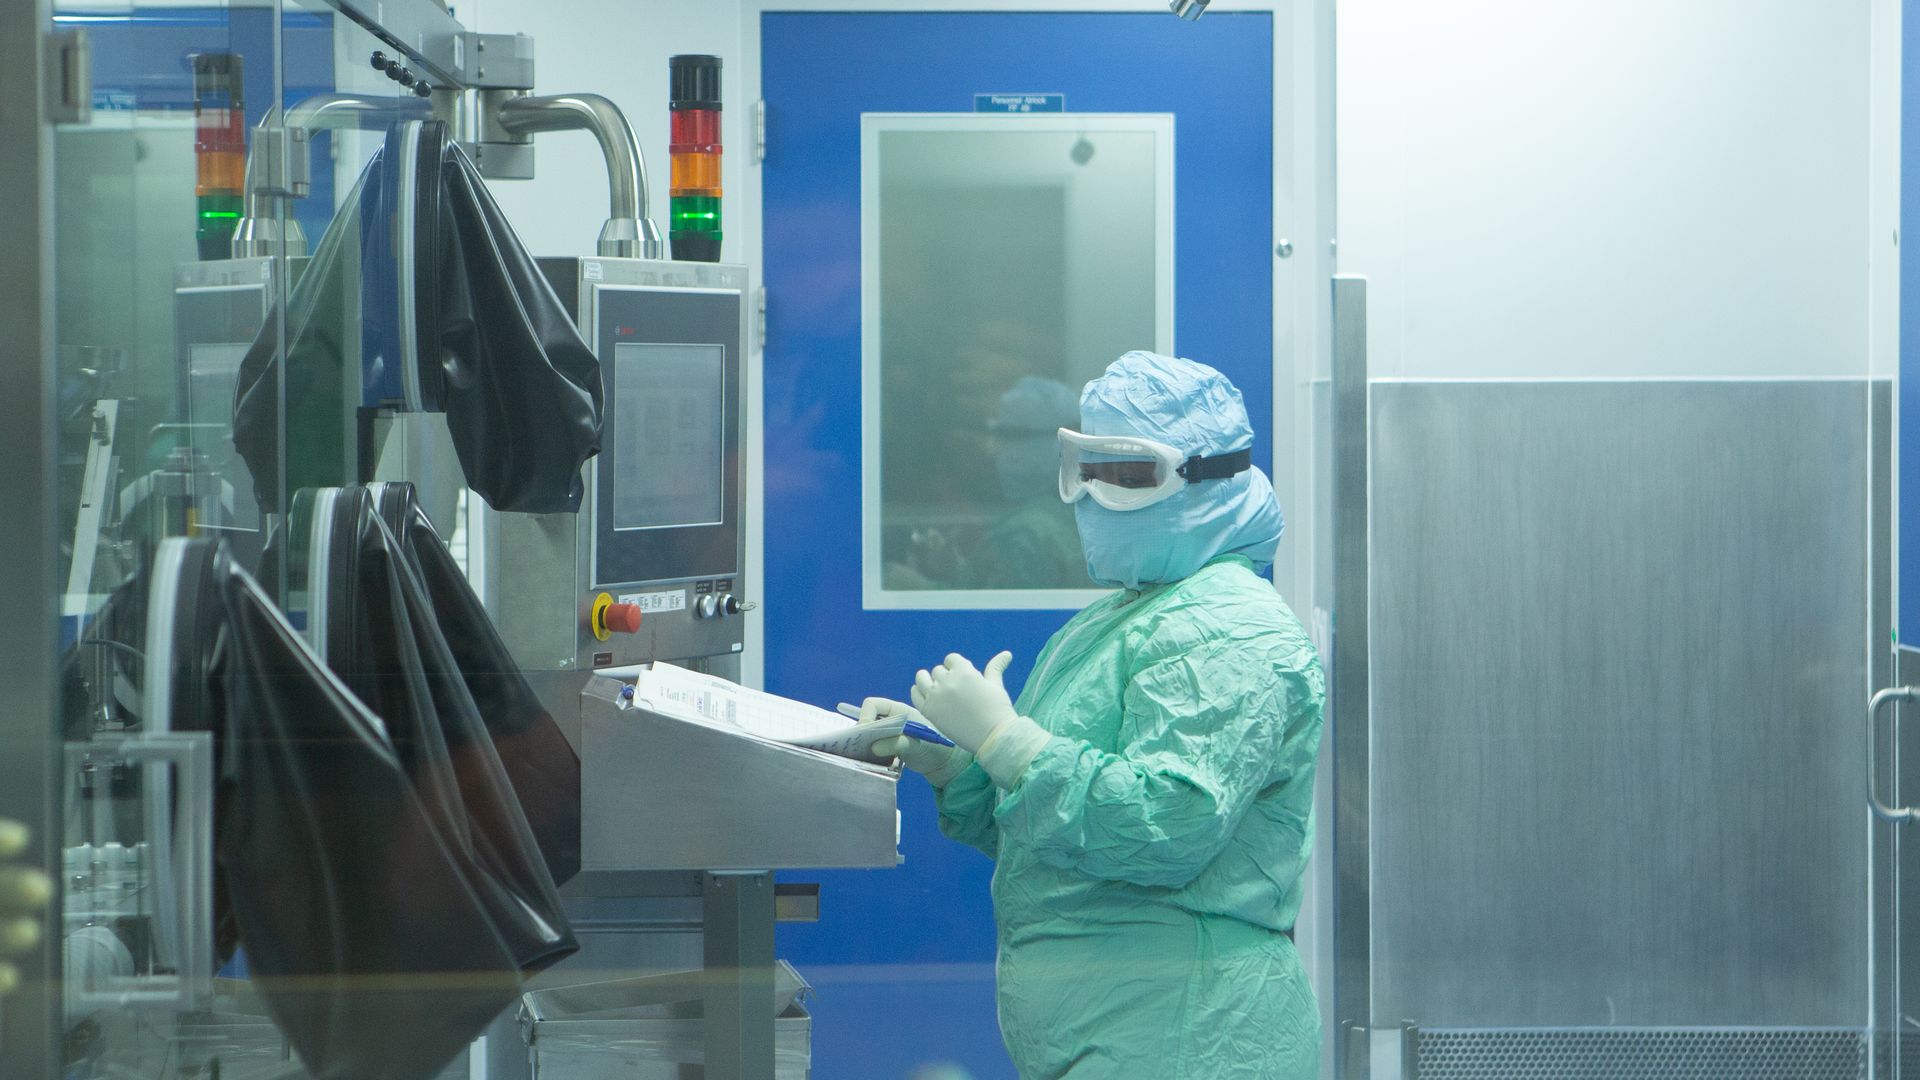 Photo of a person in a hazmat suit operating a manufacturing station